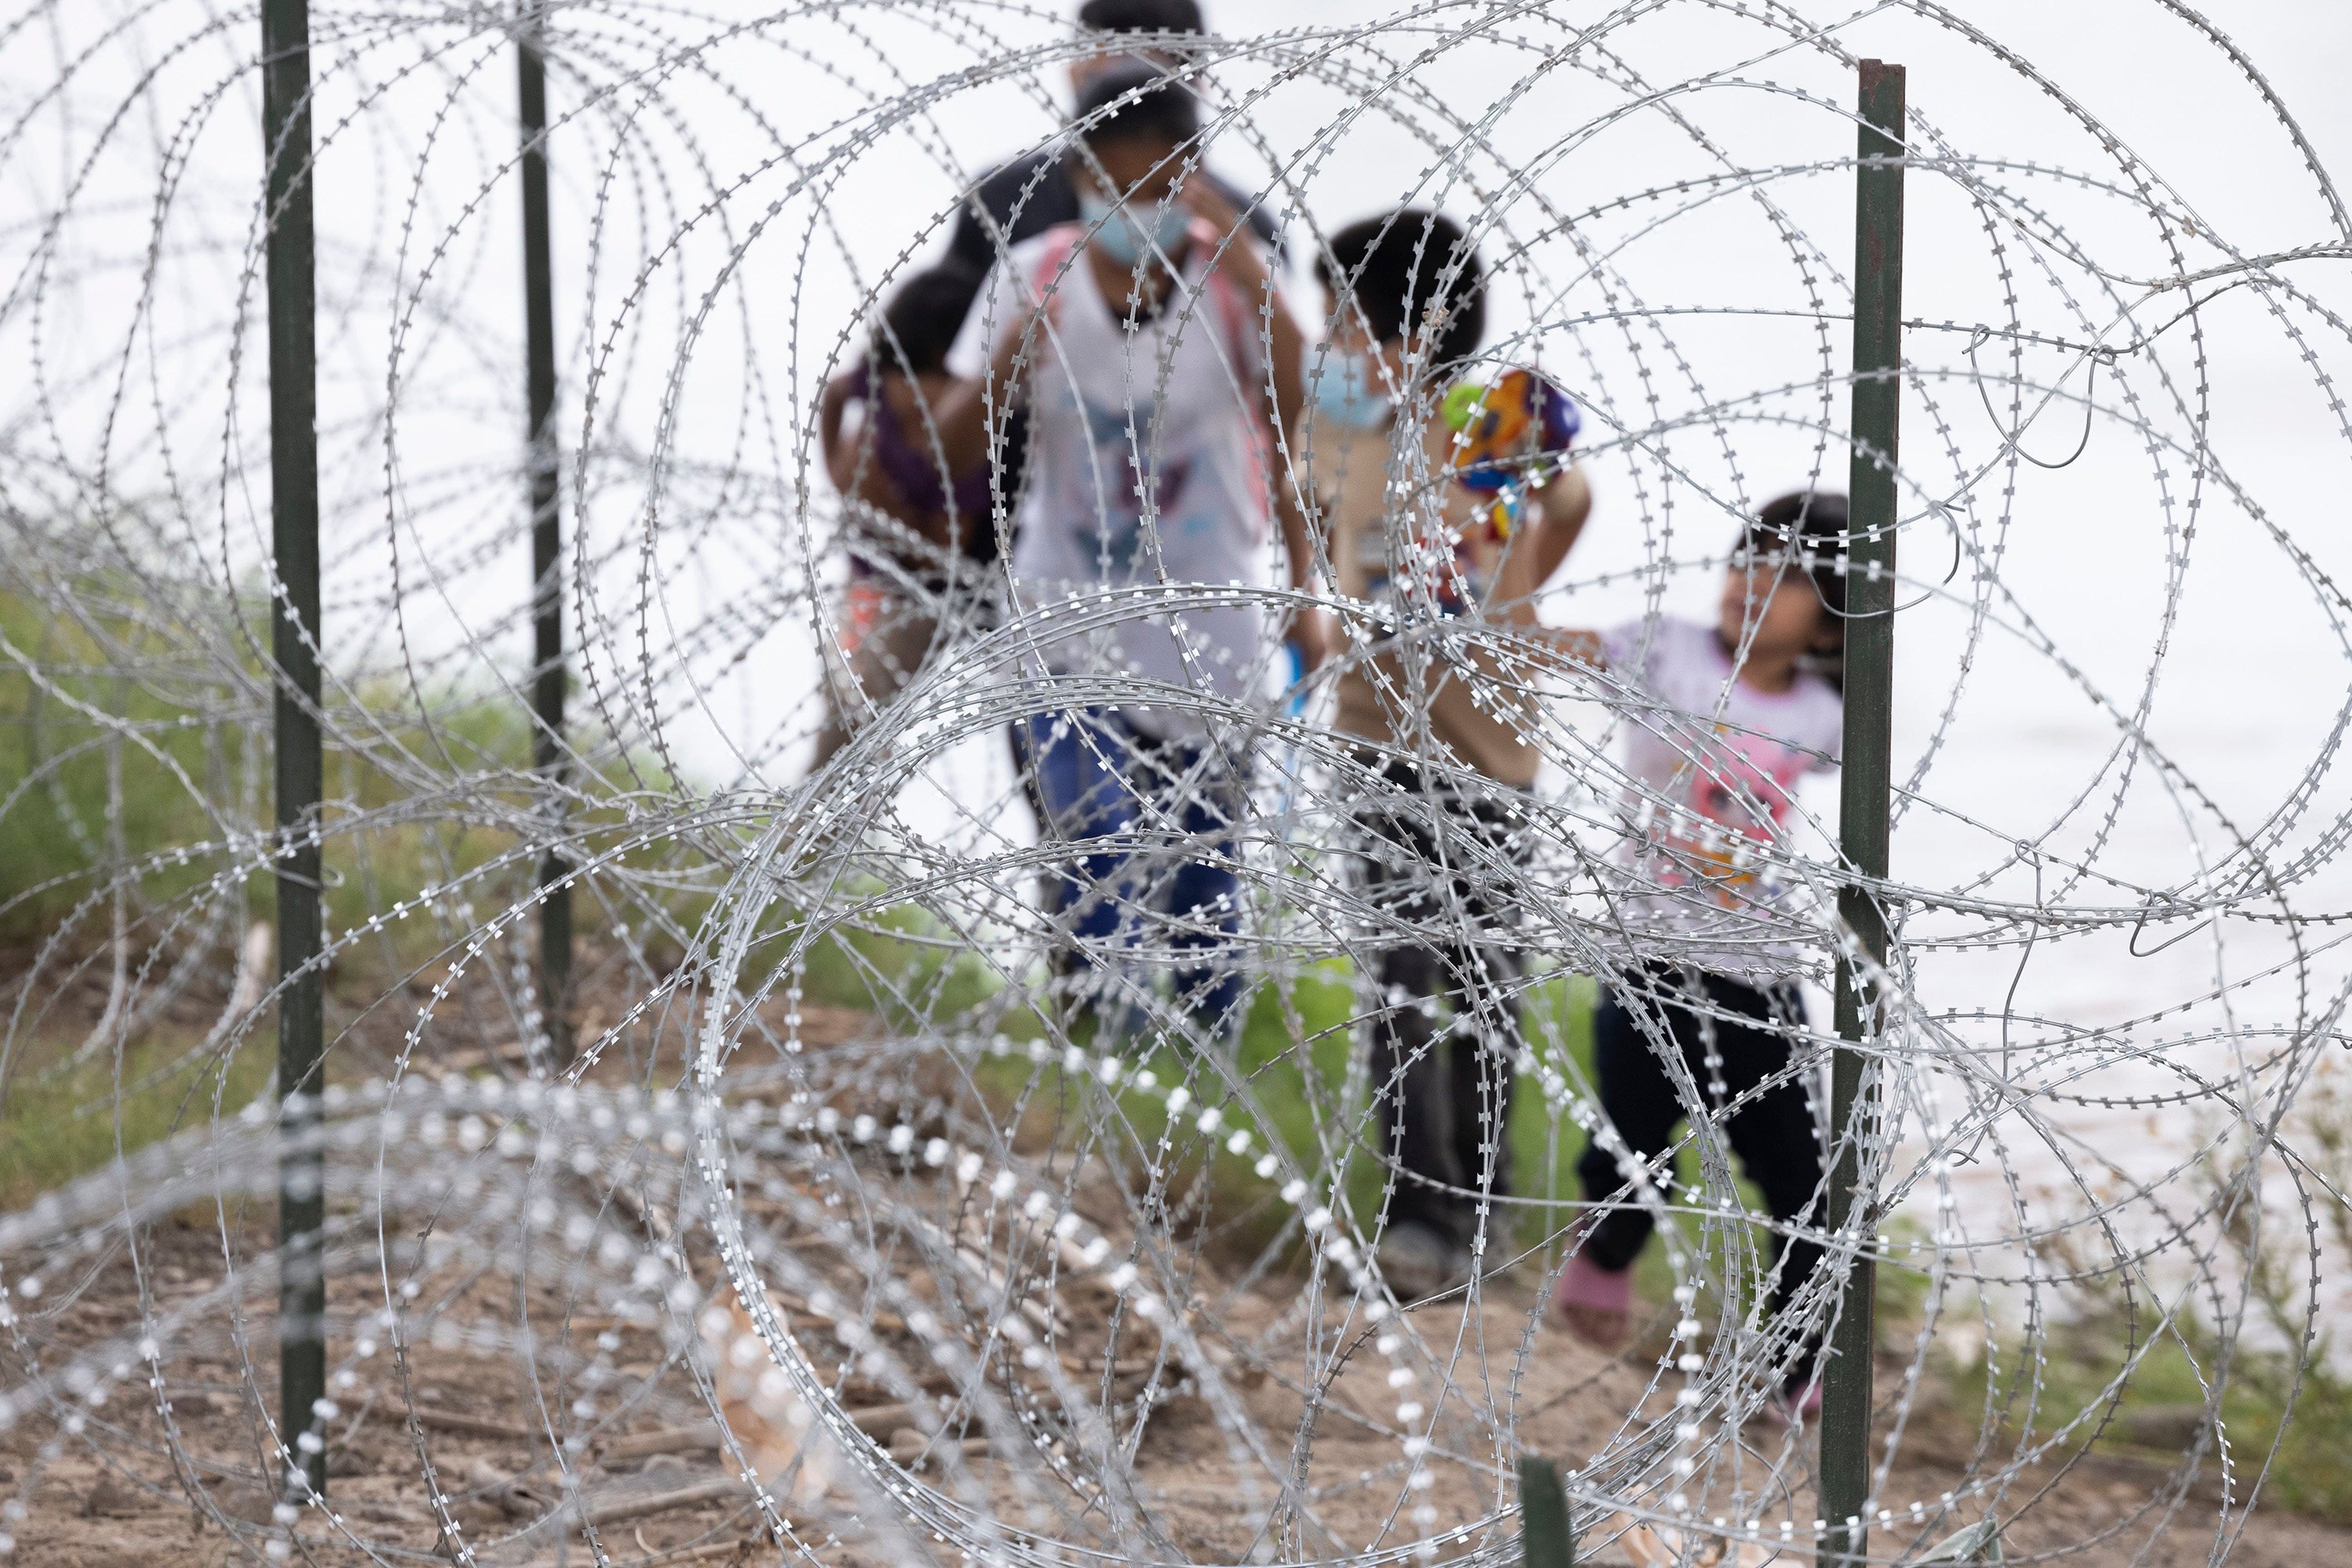 Migrants with children walk by razor wire fencing after crossing the Rio Grande River from Mexico into the US close to the Eagle Pass, Texas. Photo: The Dallas Morning News / TNS